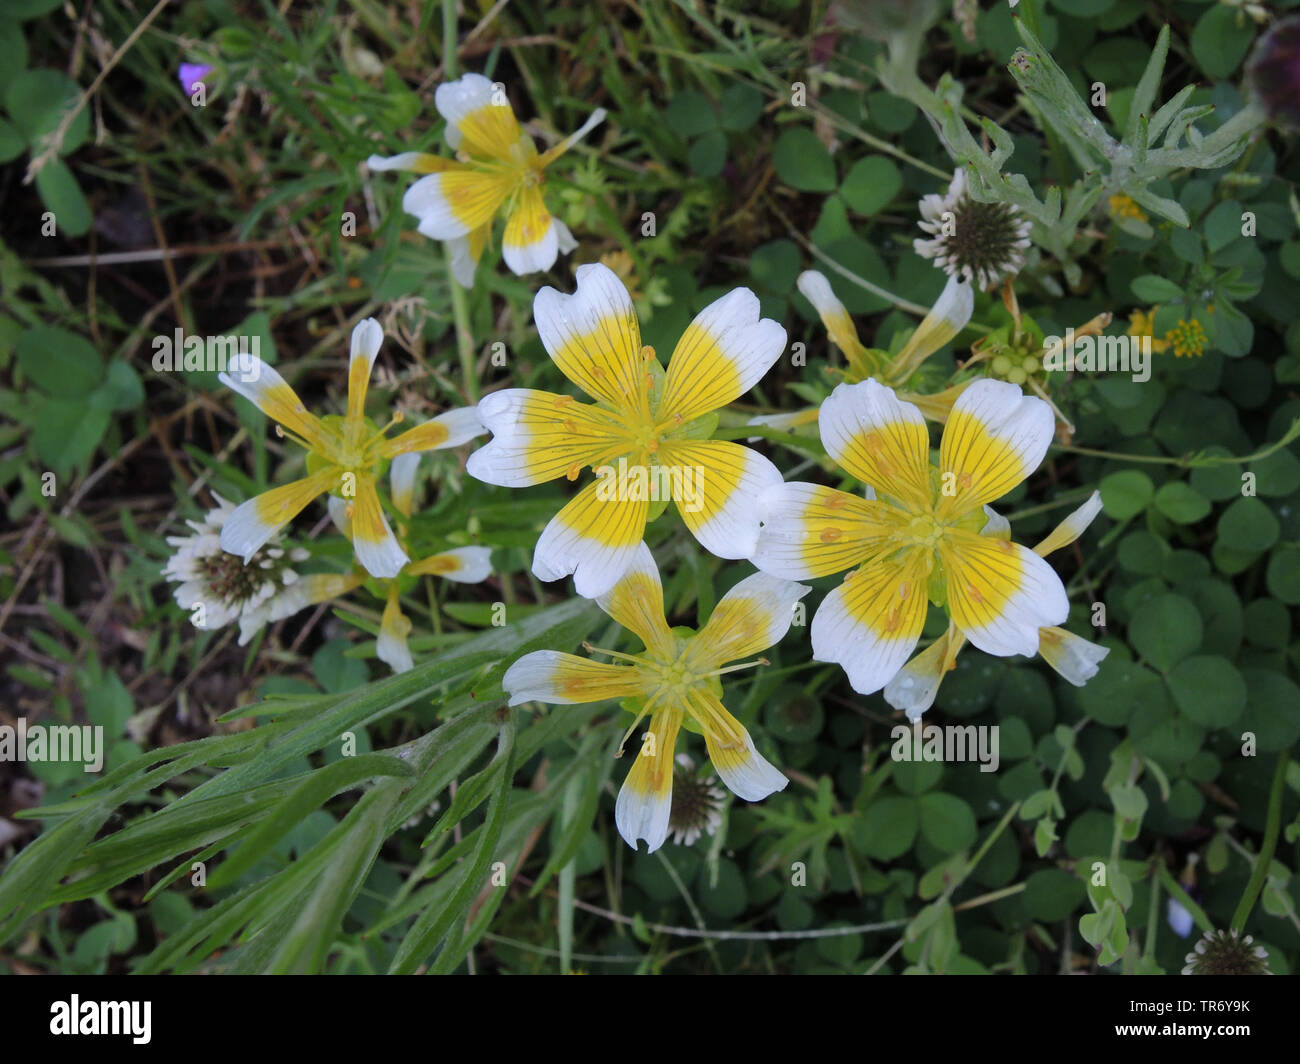 meadow foam (Limnanthes douglasii), blooming Stock Photo